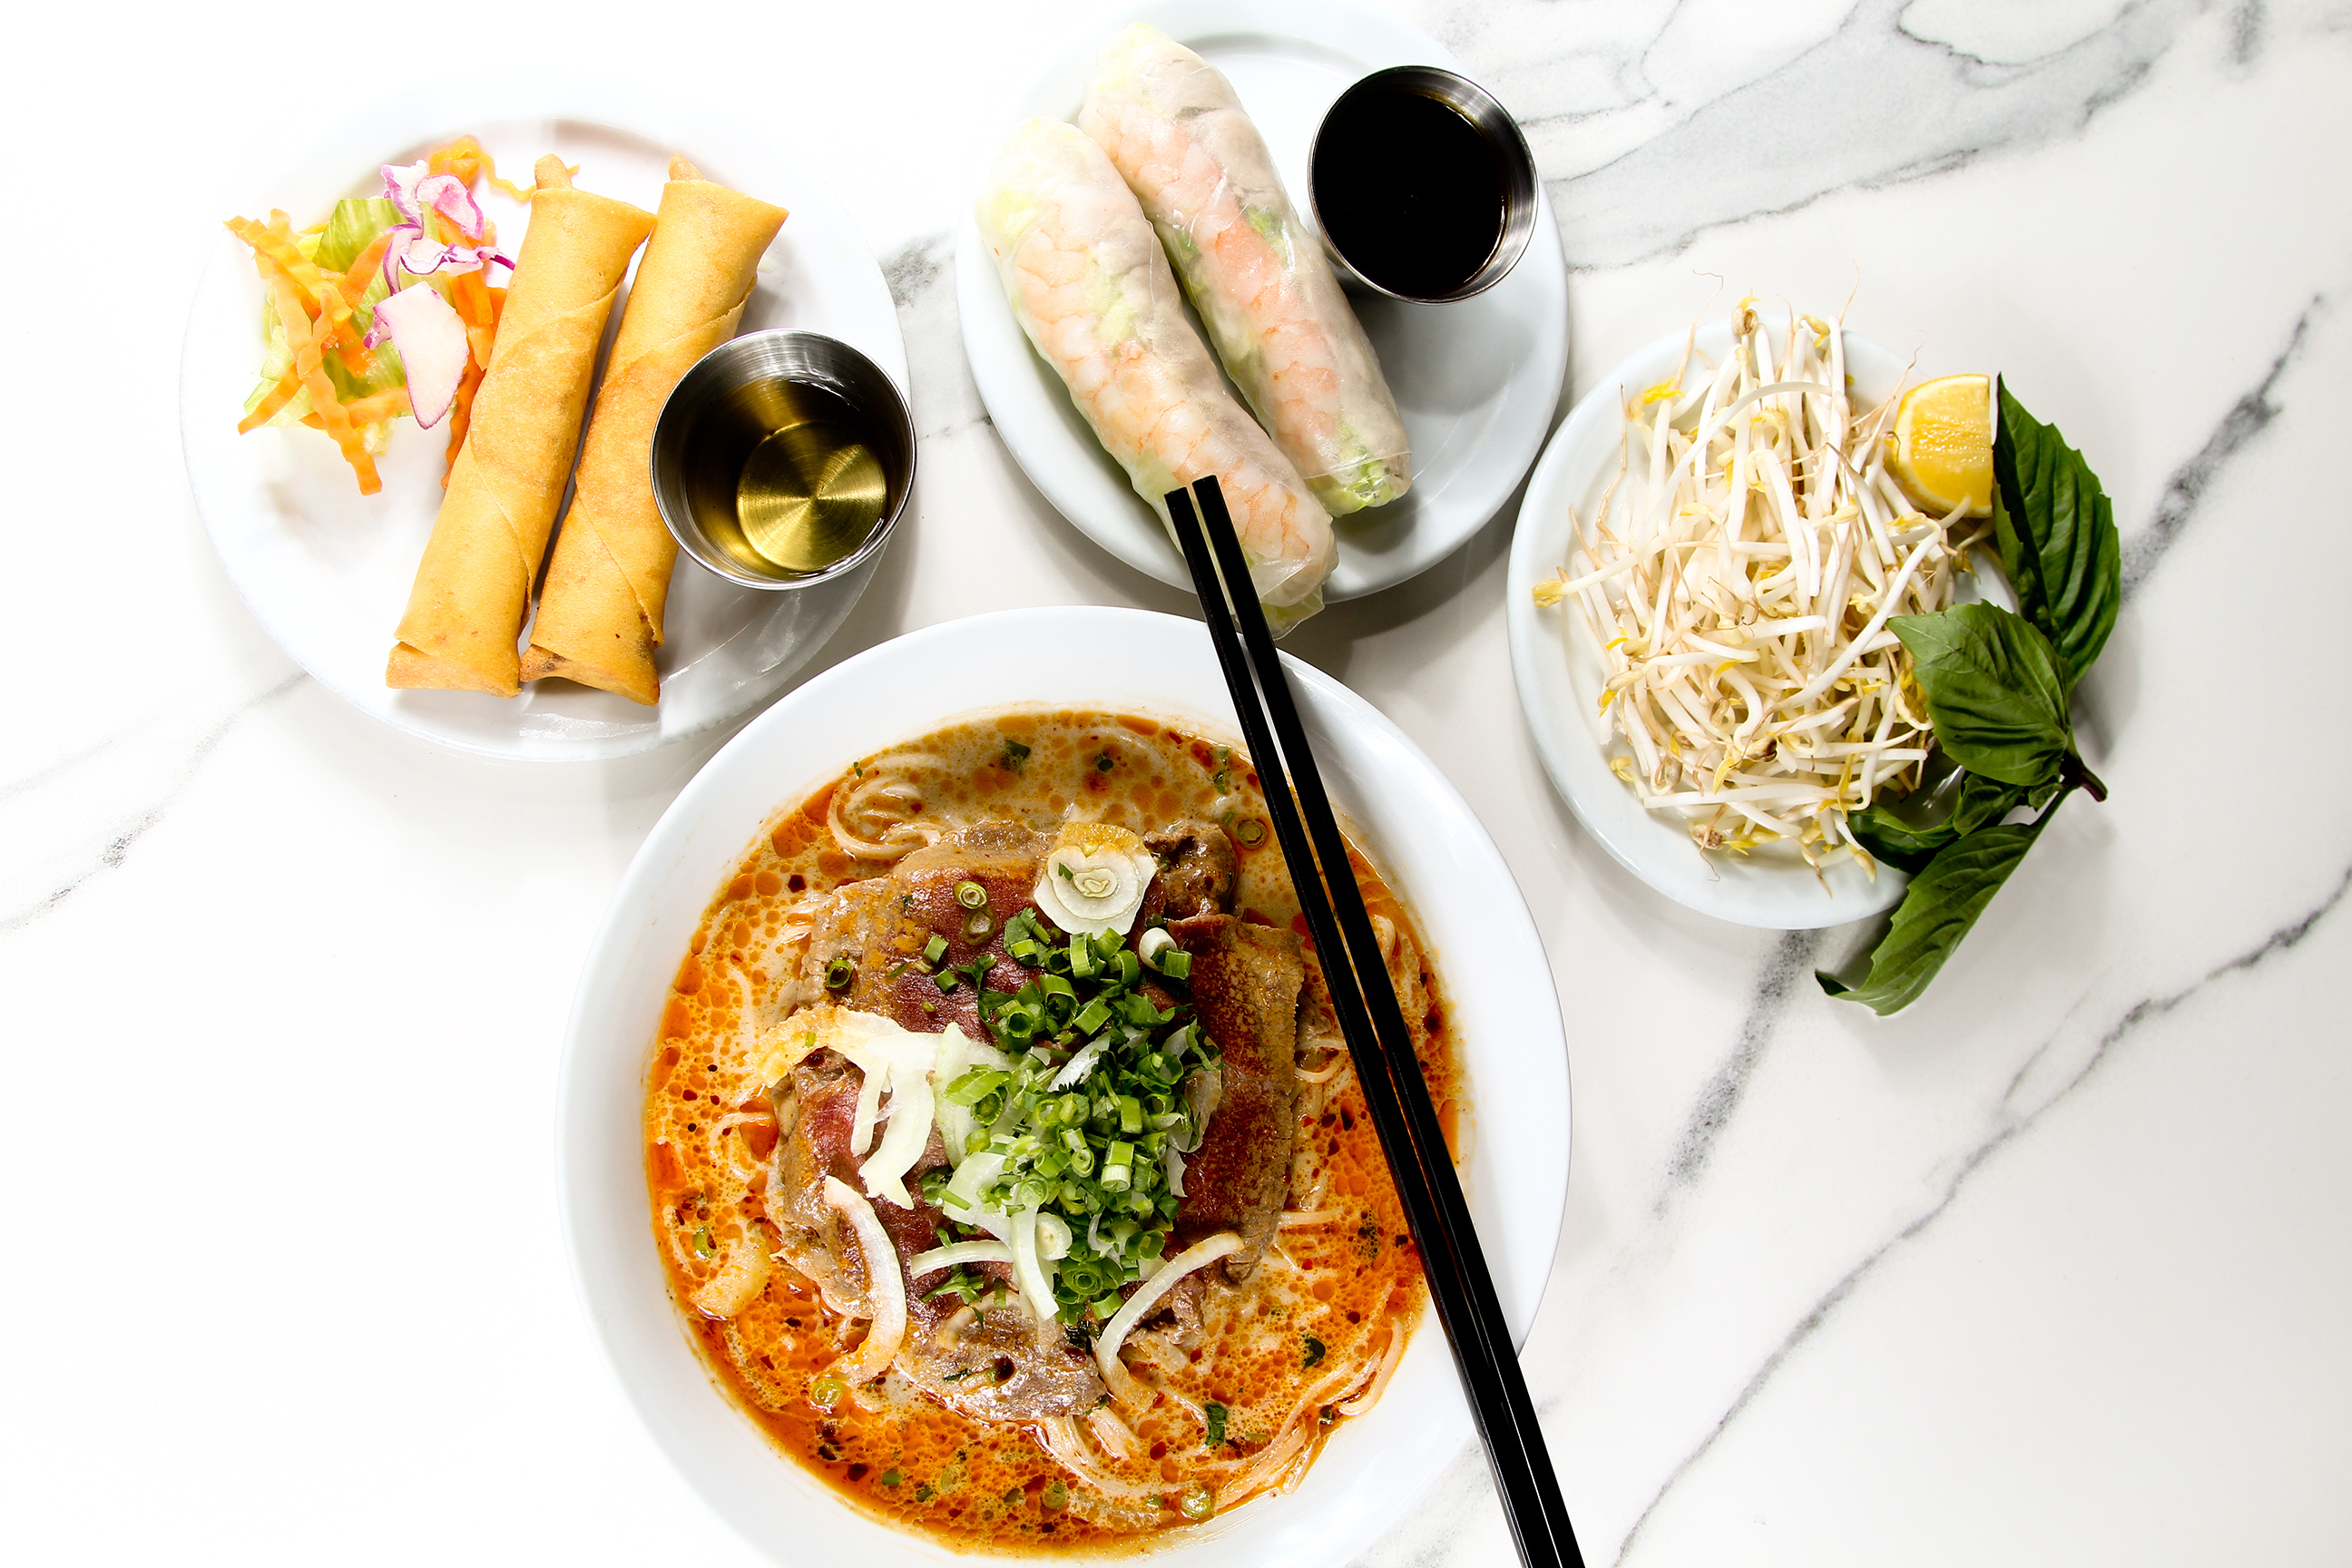 Bowl of pho noodles and other Vietnamese food